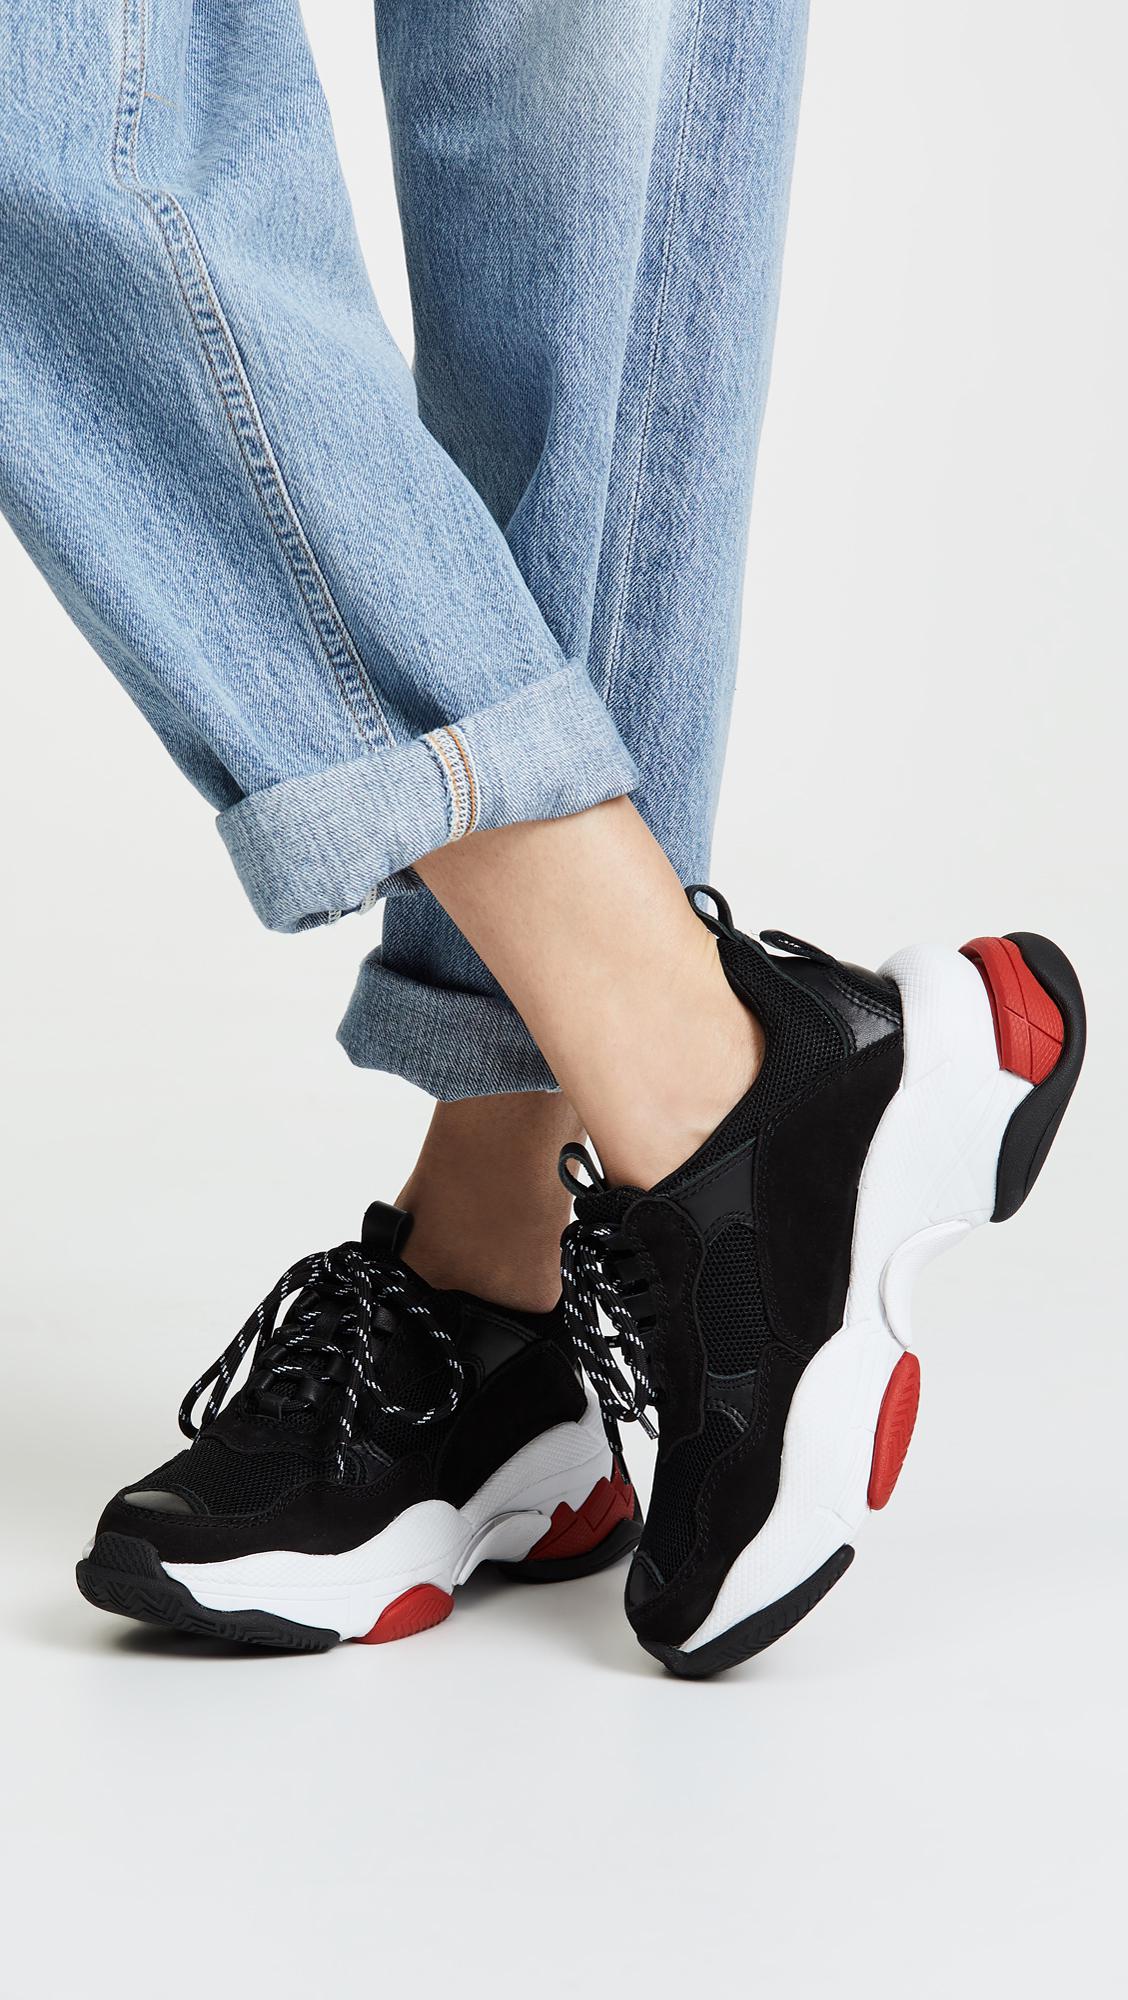 Jeffrey Campbell Suede Lo-fi Sneakers in Black/Red/White (Black) - Lyst